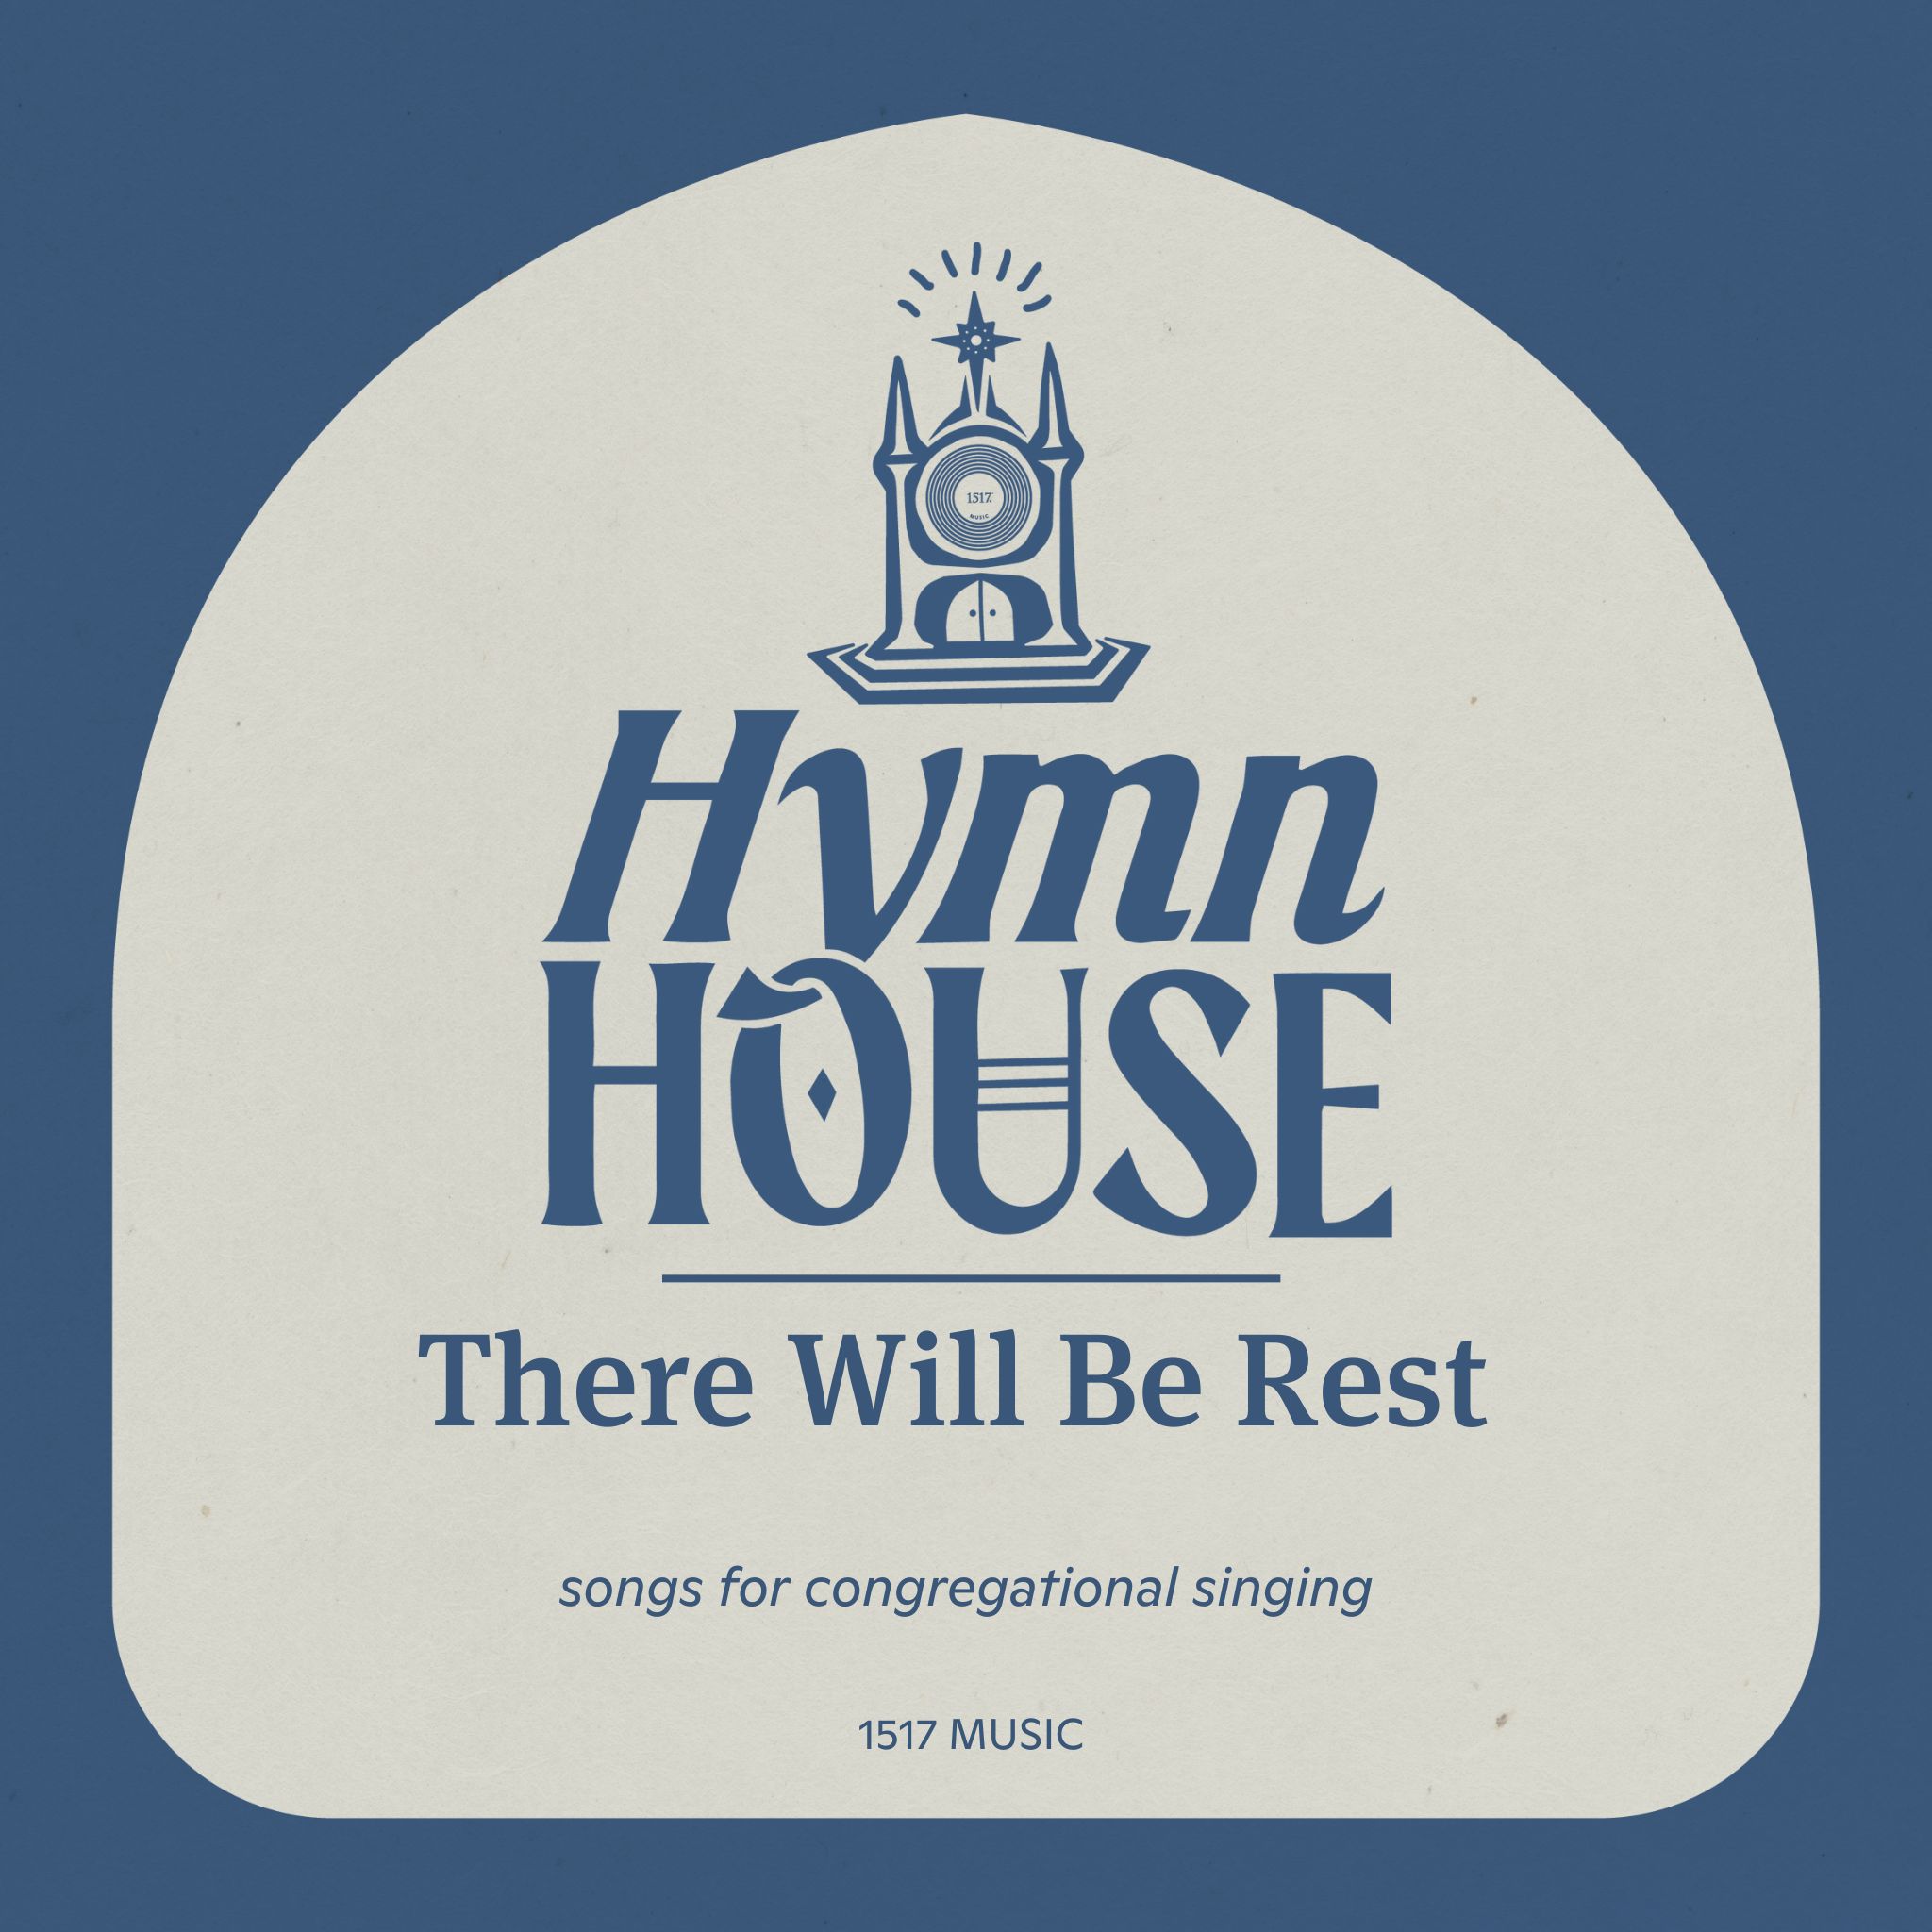 There Will Be Rest (Hymn House)